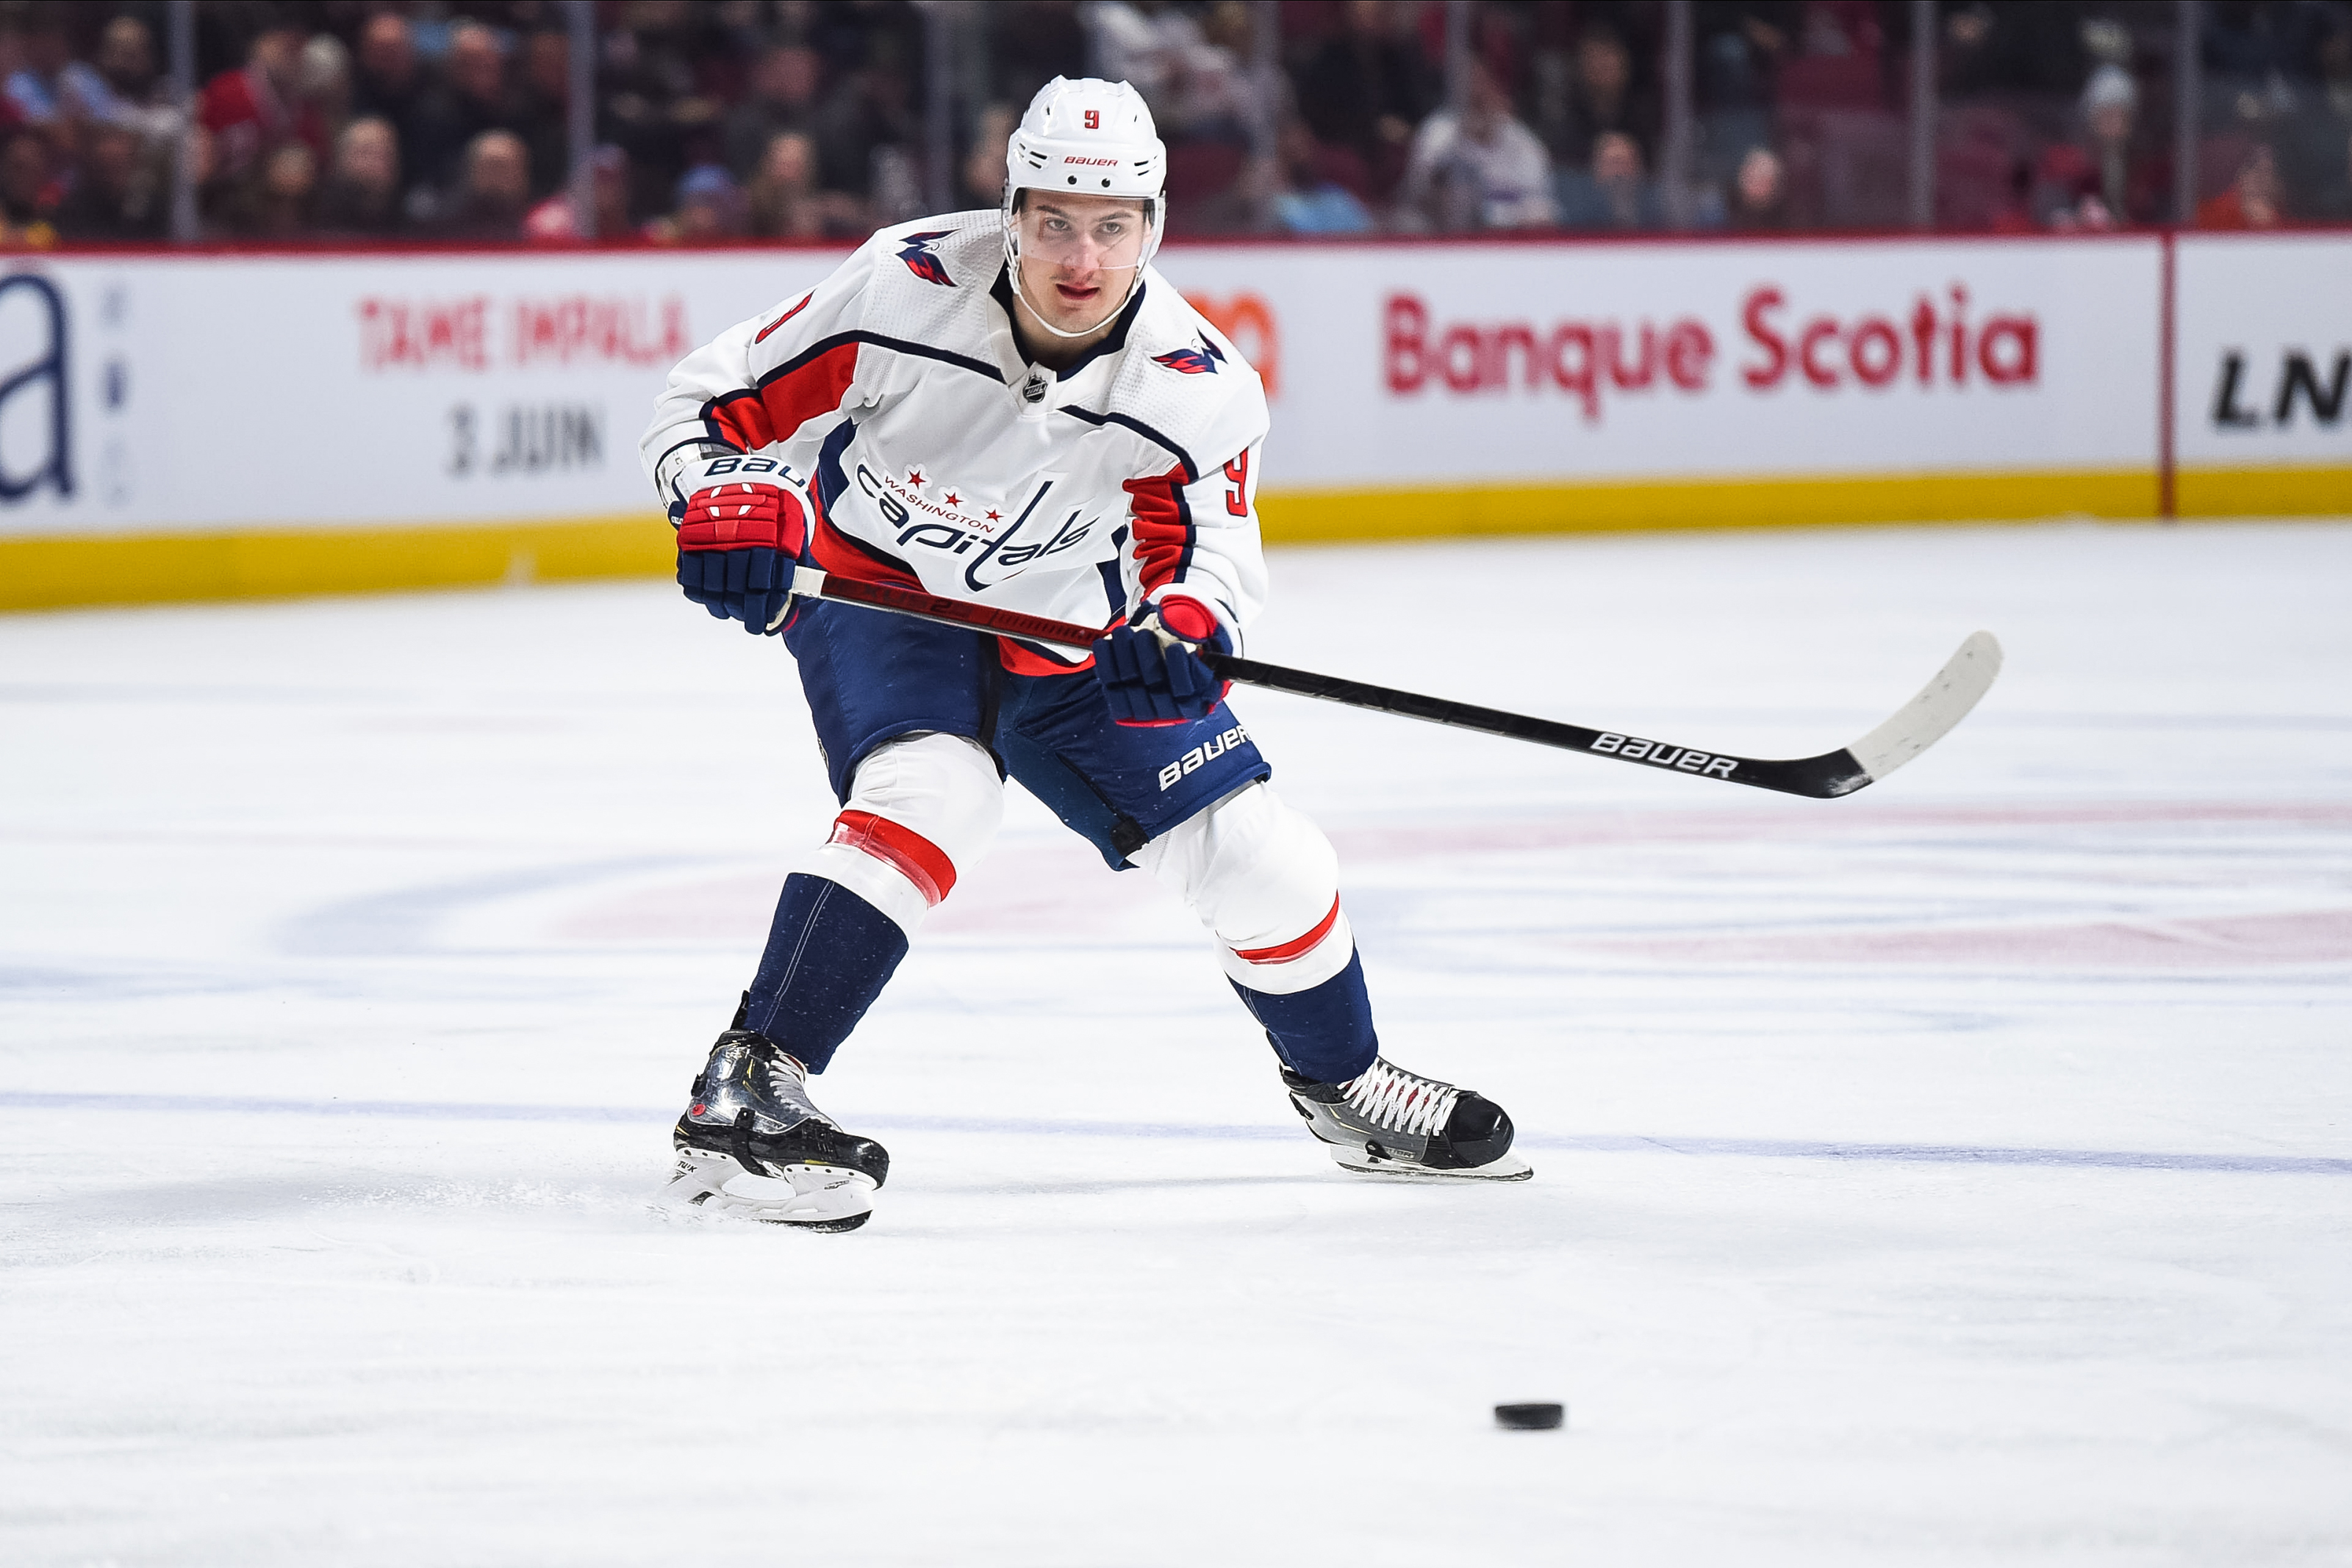 Report: Orlov 'Sounds Like' He Wants To Return To Capitals As He Approaches  Free Agency - The Hockey News Washington Capitals News, Analysis and More